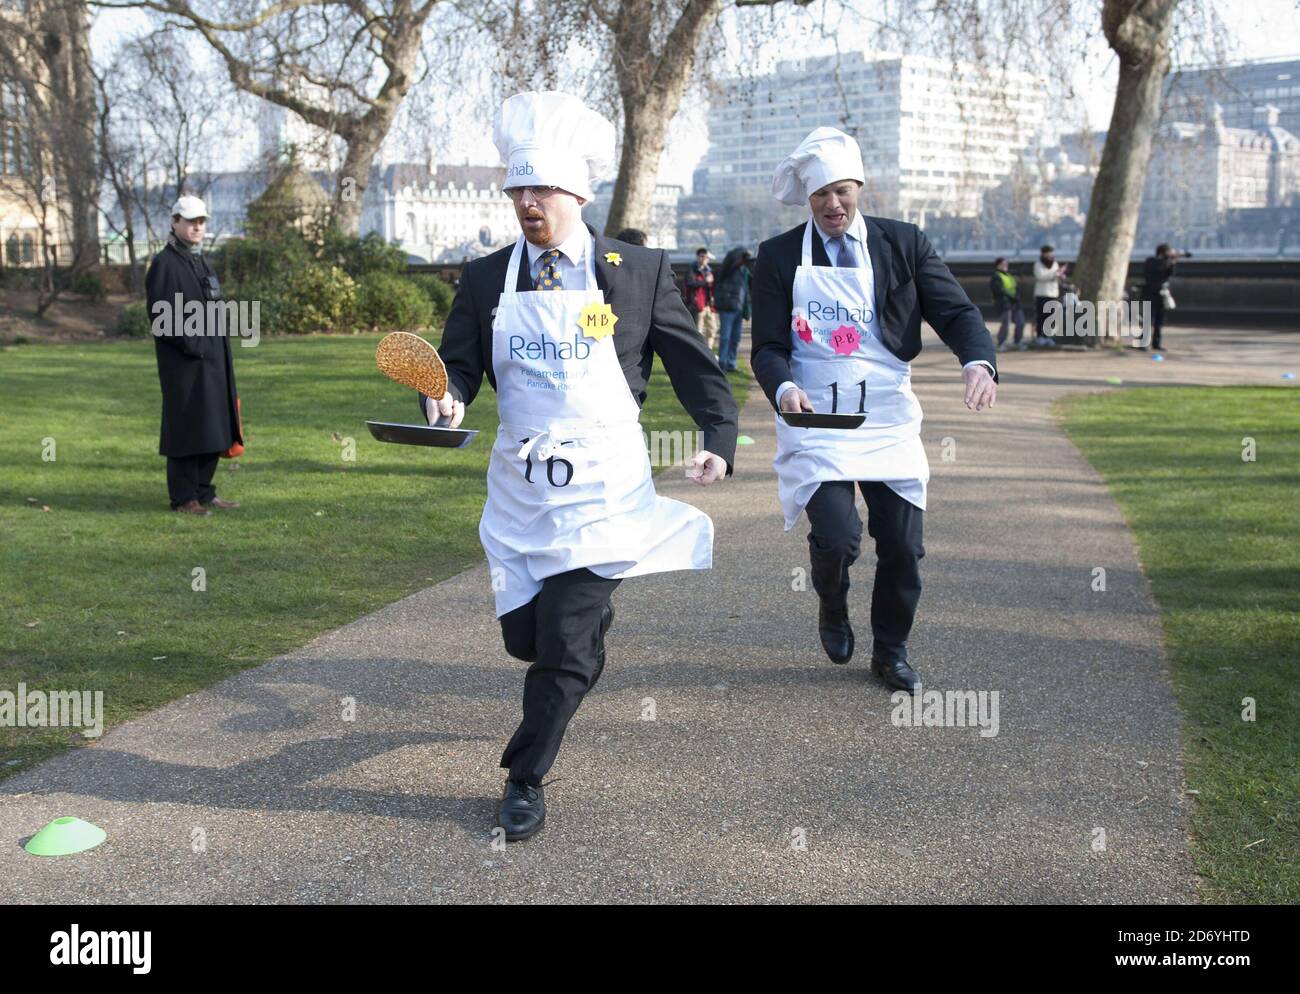 Julian Huppert MP (left) and journalist Tom Bradby take part in the 2011 Parliamentary Pancake Race, to raise awareness for Rehab, in Victoria Tower Gardens in central London. Stock Photo